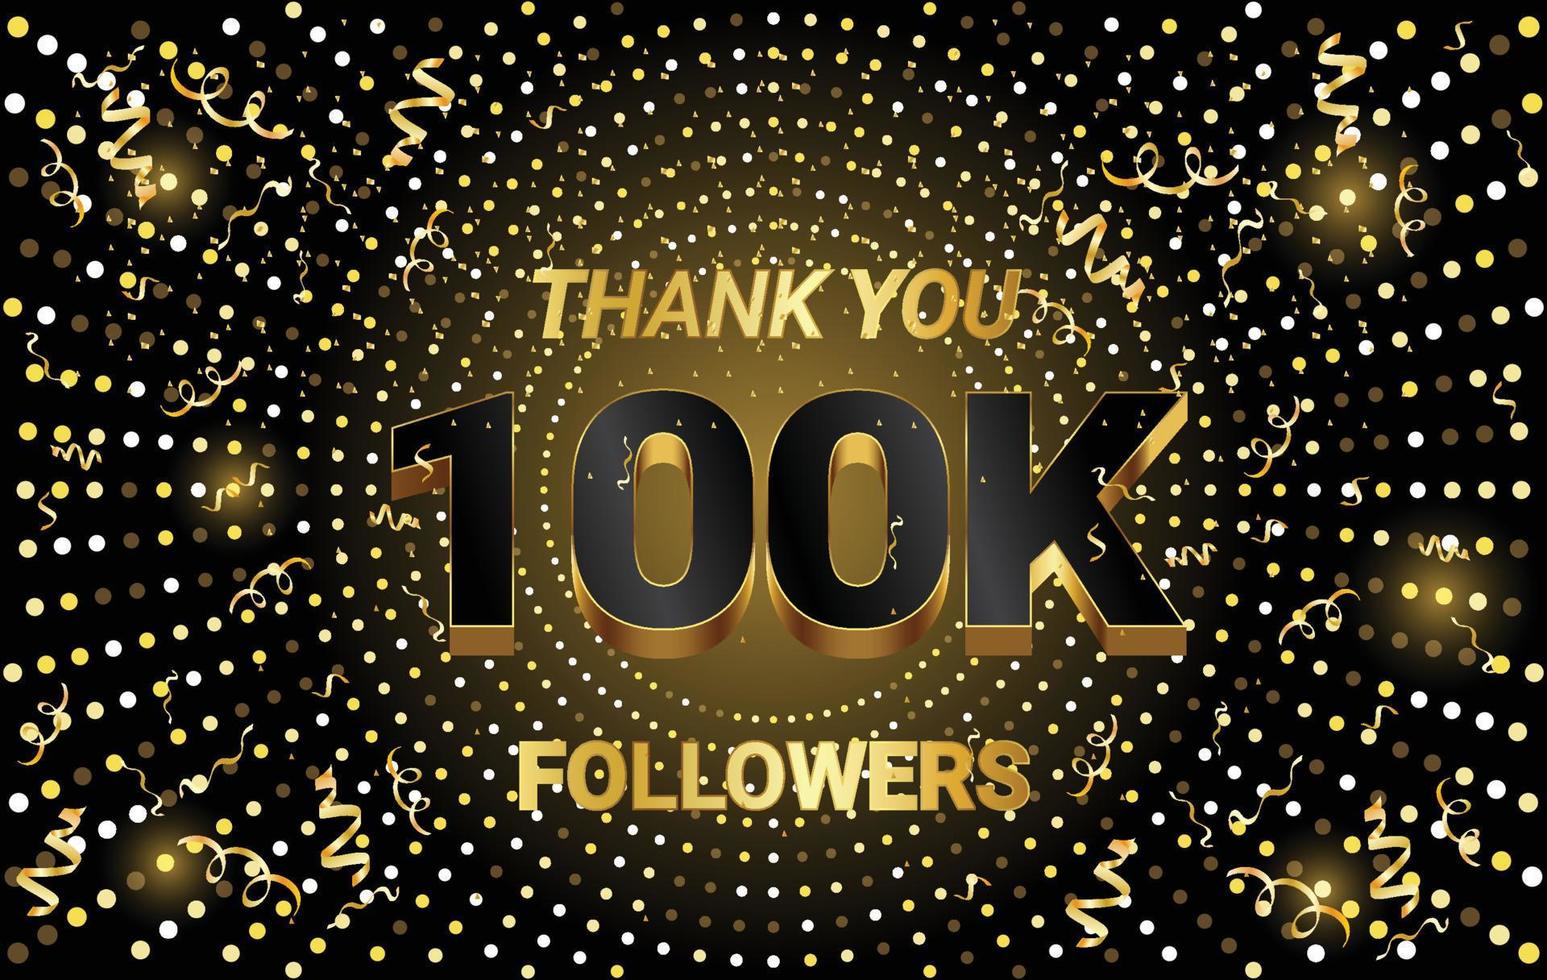 100k followers vector art with black gold text effect on glitter background